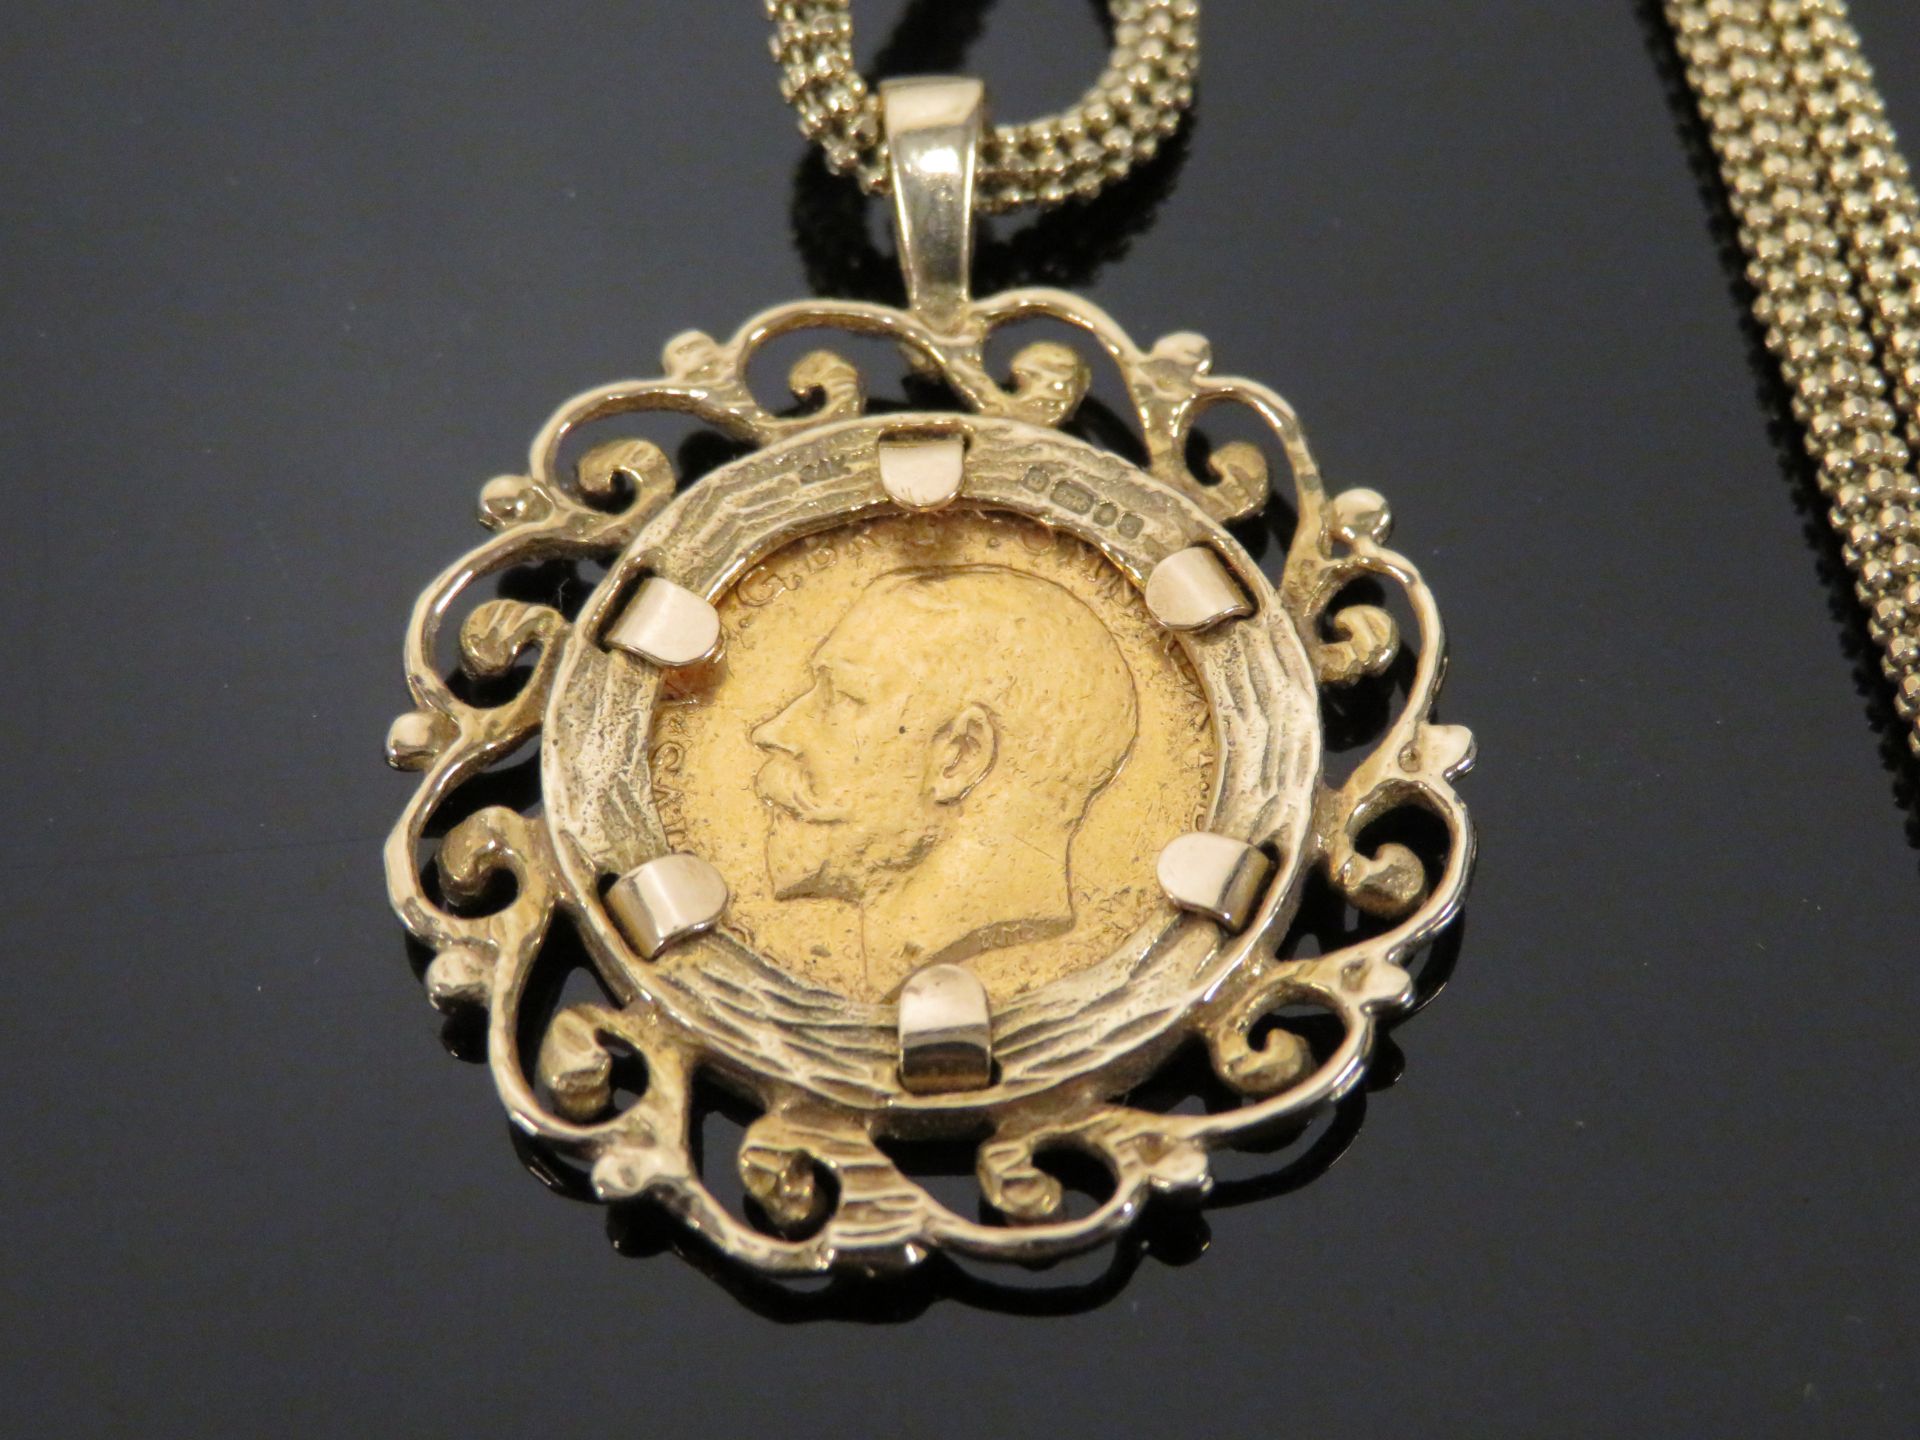 1913 Half Sovereign mounted on gold chain - Image 3 of 5